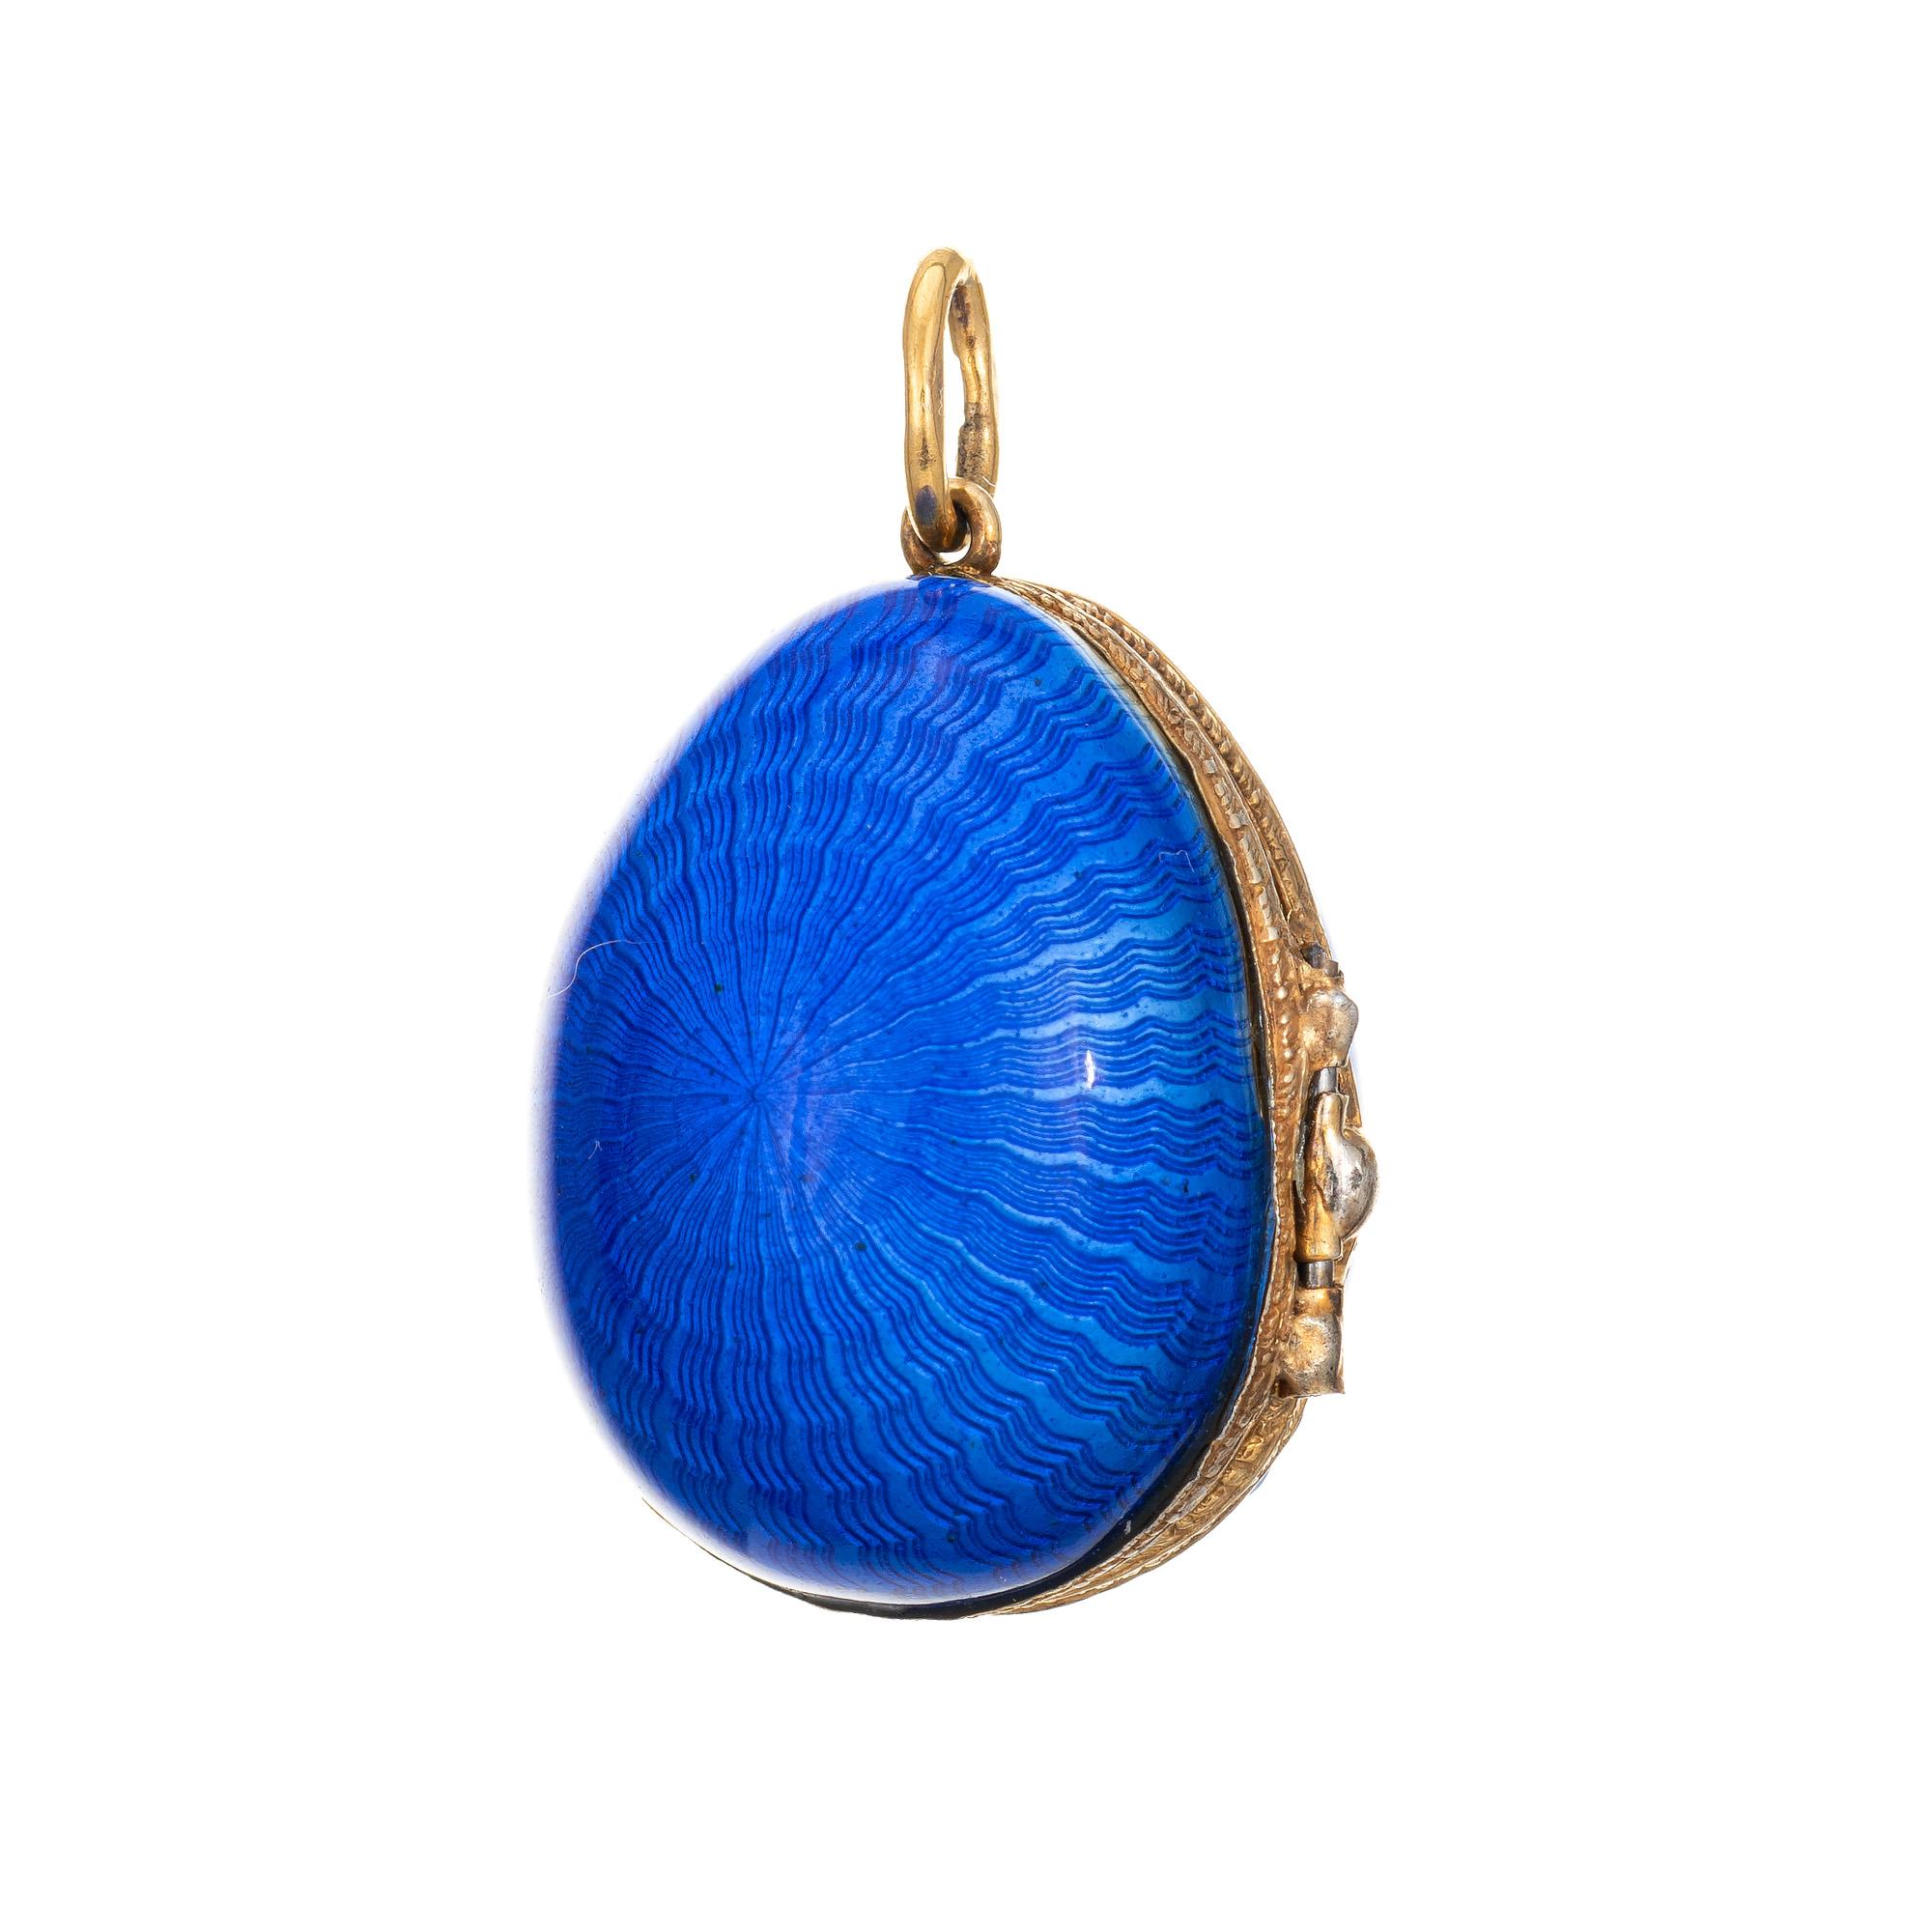 Finely detailed vintage Russian enameled egg crafted in sterling silver (gilt).   

8 old rose cut diamonds total an estimated 0.05 carats (estimated at I-J color and SI2 clarity). The egg opens to reveal two sapphires, a pearl and emerald. The egg